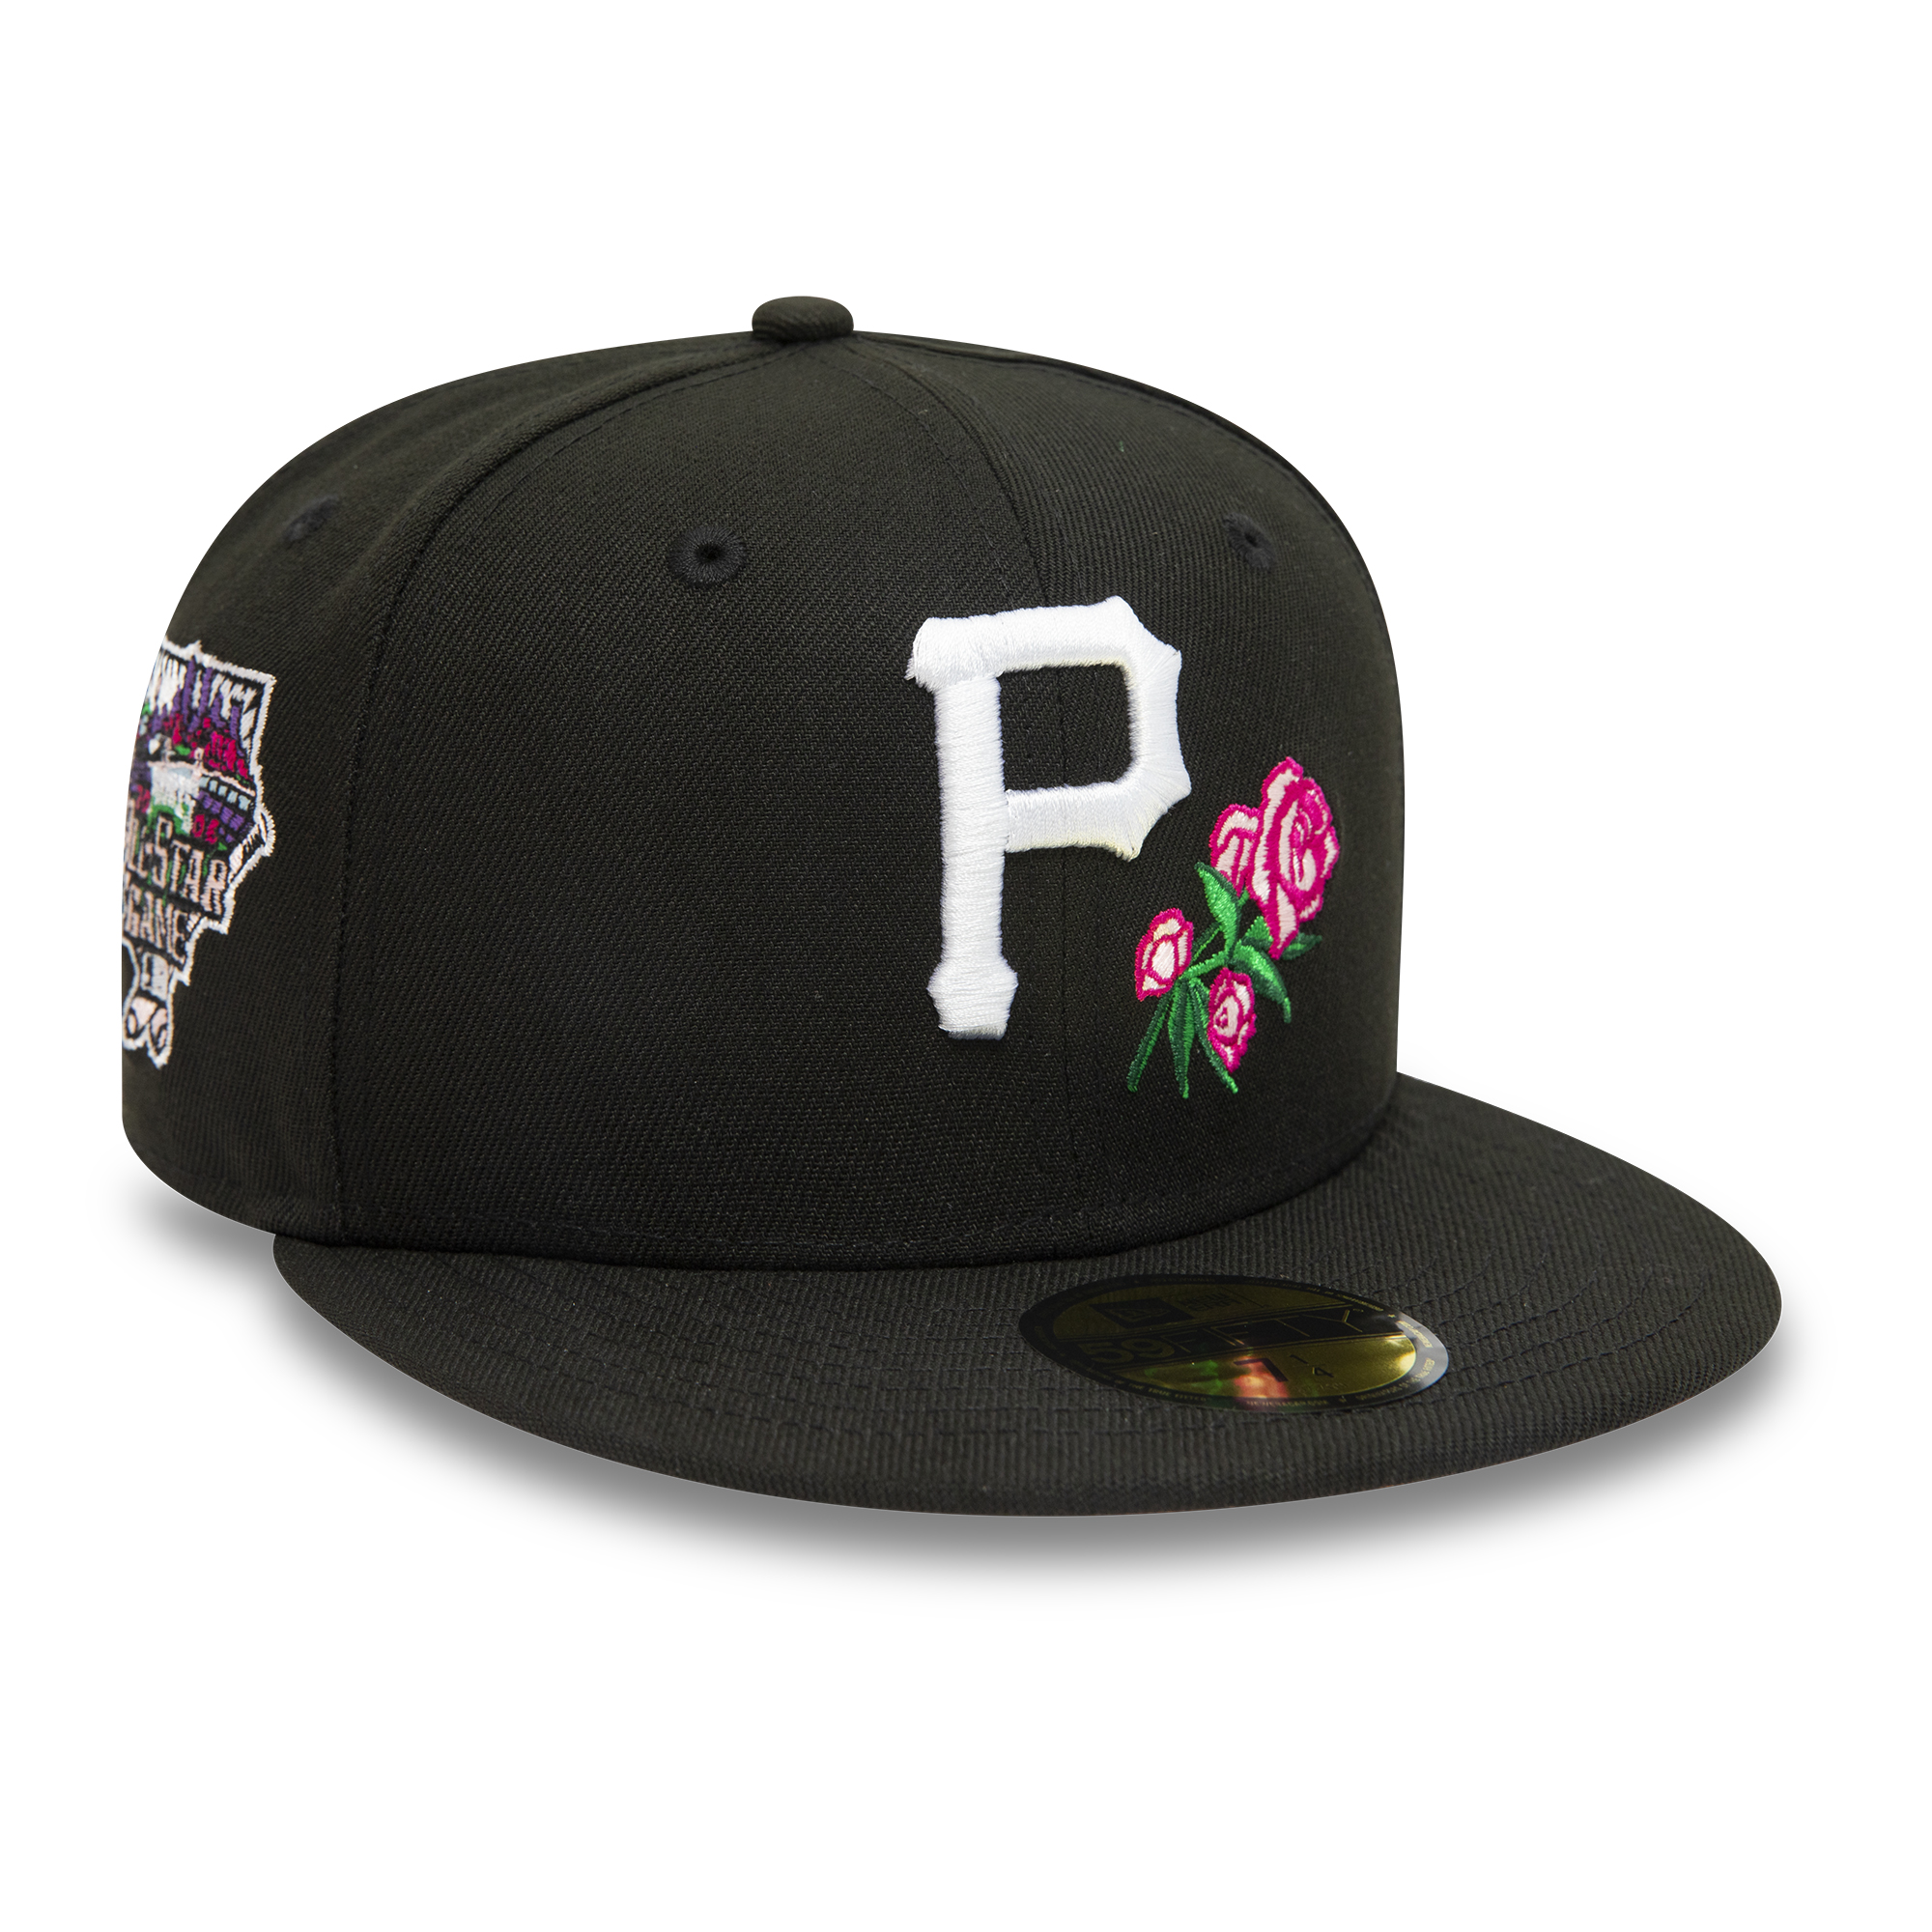 Official New Era Pittsburgh Pirates MLB Black 59FIFTY Fitted Cap B8219